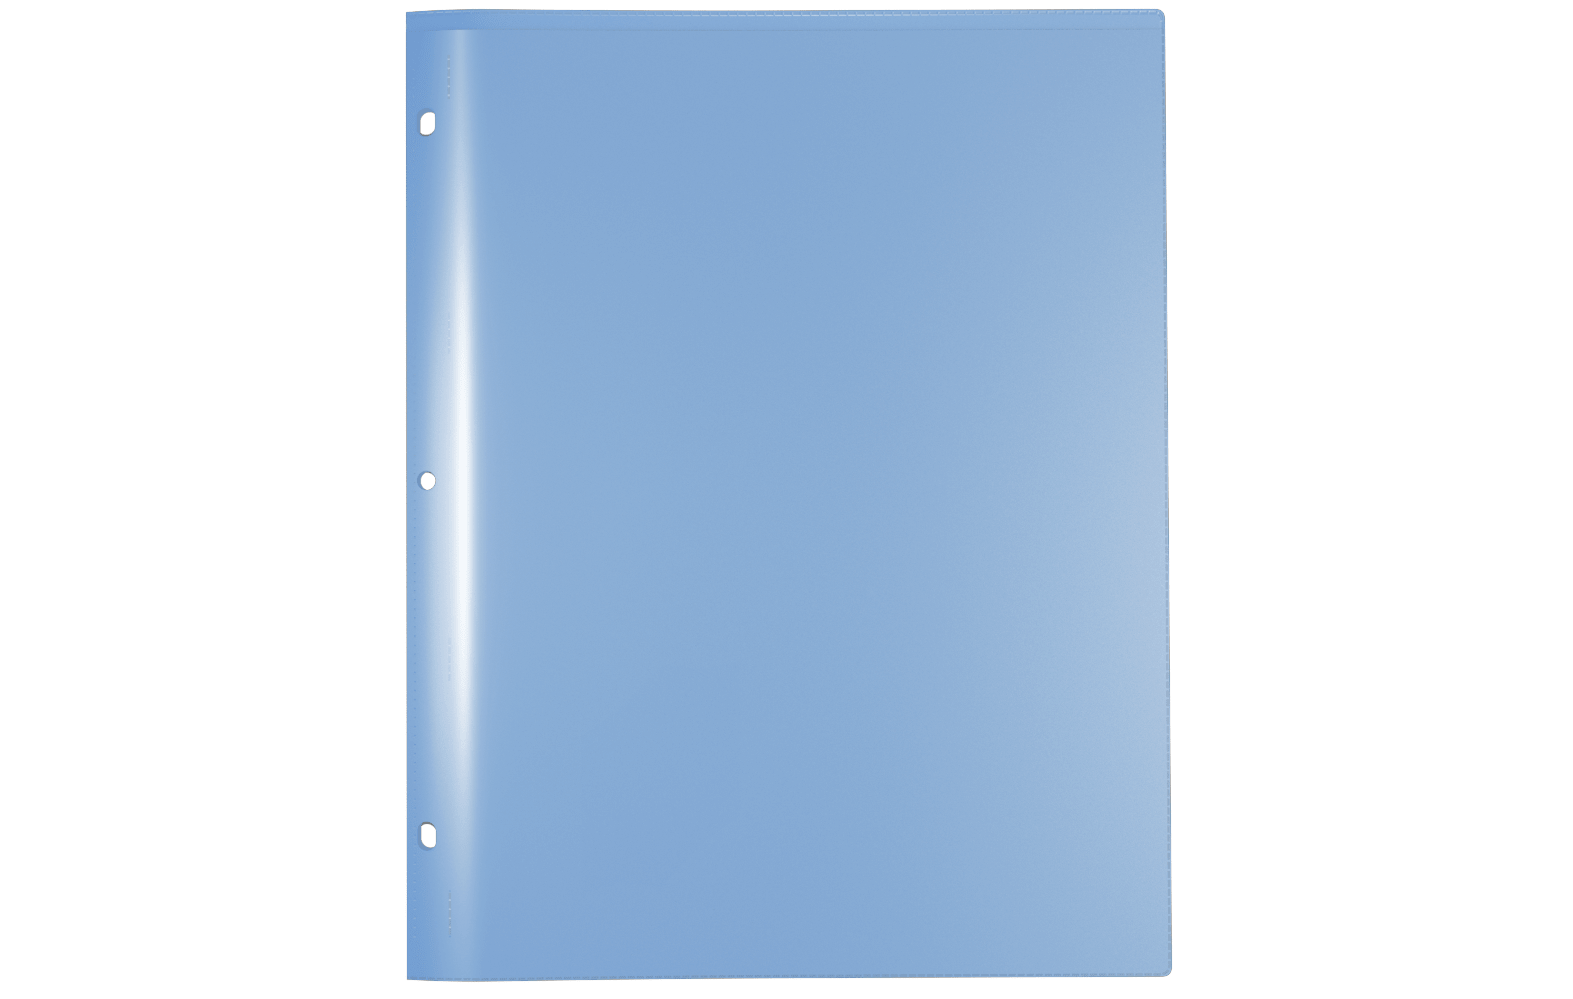 Wholesale Two-Pocket Folders by Smead Discounts on SMD87726